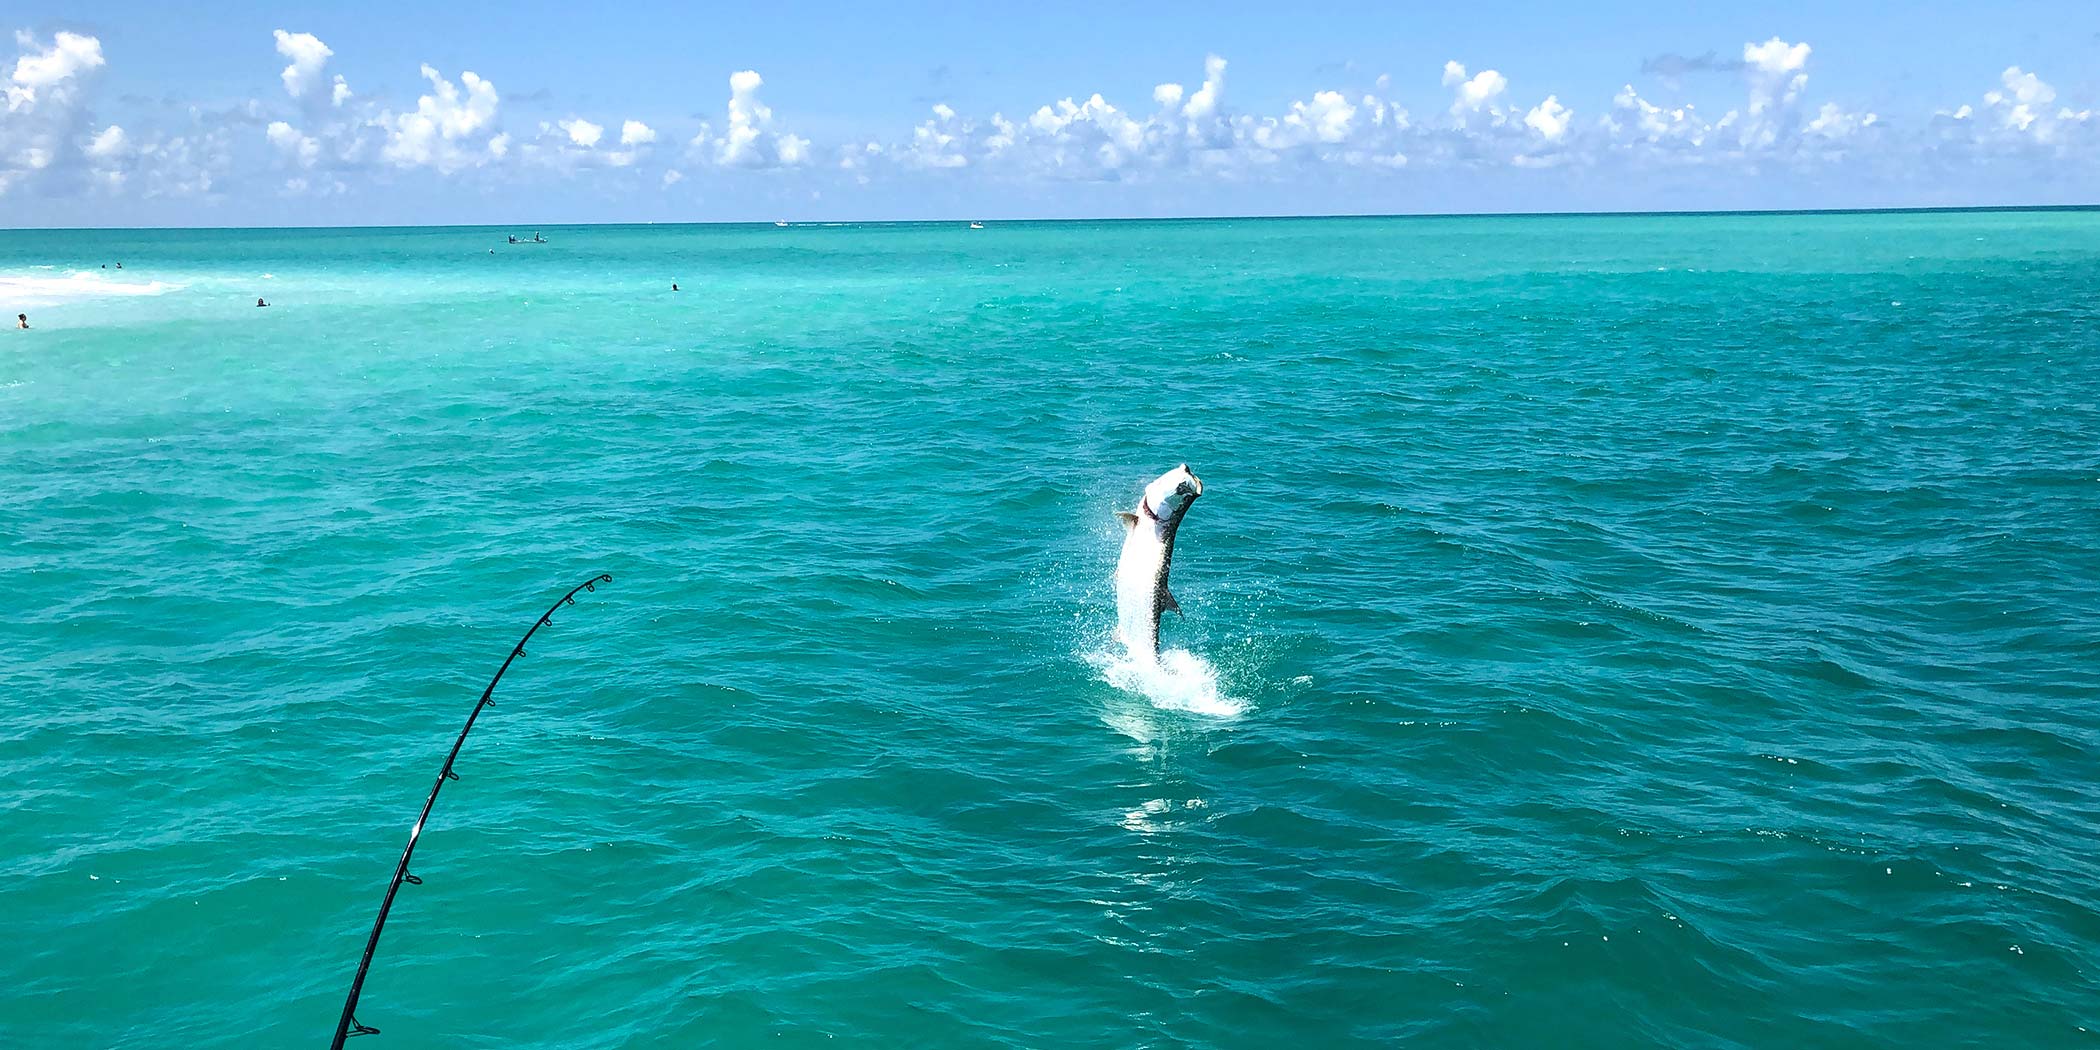 Summer tarpon fishing can include some thrilling acrobatics on the part of the fish!